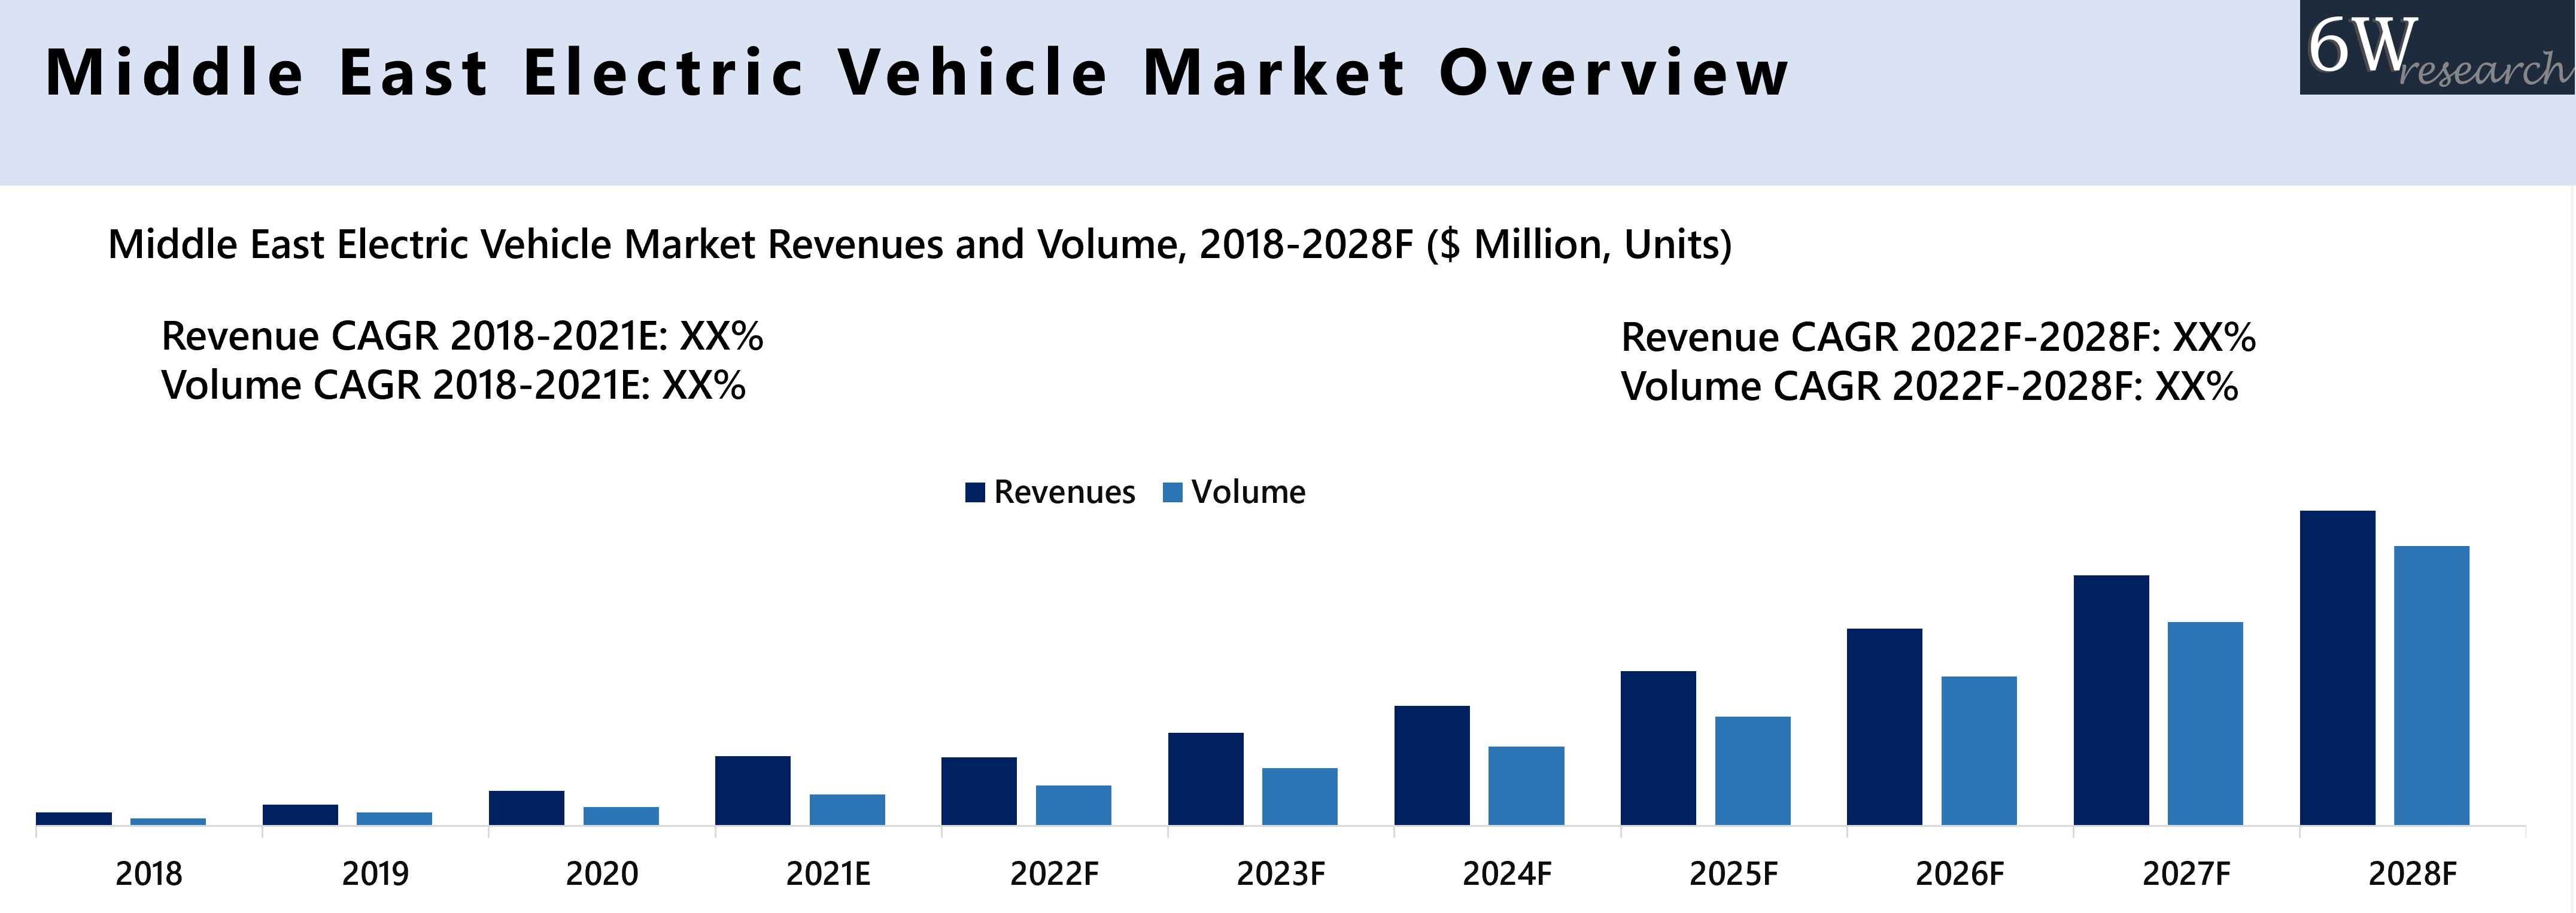 Middle East Electric Vehicle Market Overview